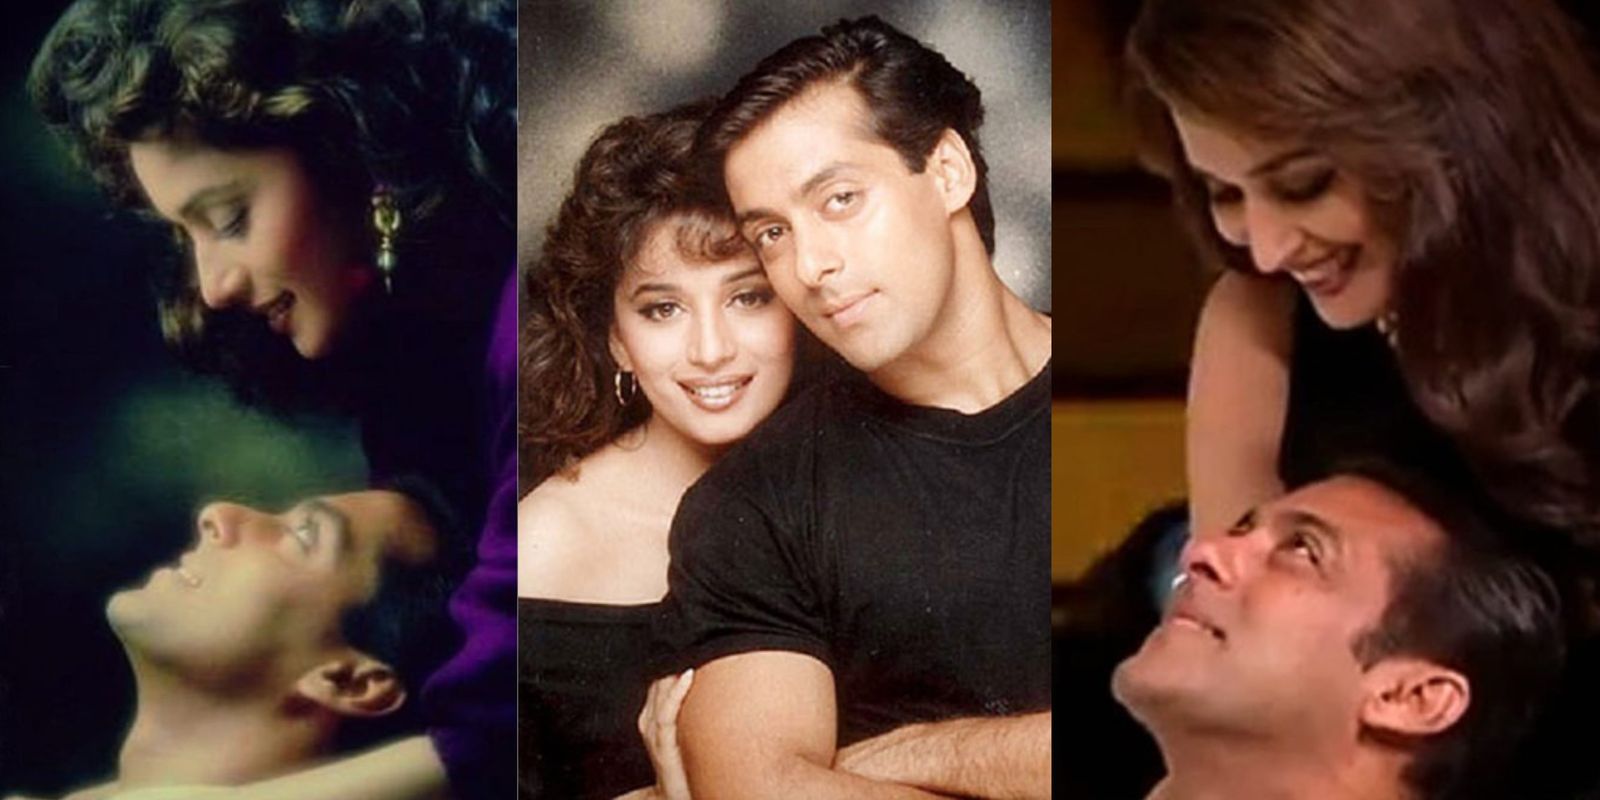 Madhuri Dixit Celebrates 26 Years Of Hum Aapke Hain Koun With A Cute ‘Then And Now’ Pic Featuring Salman Khan